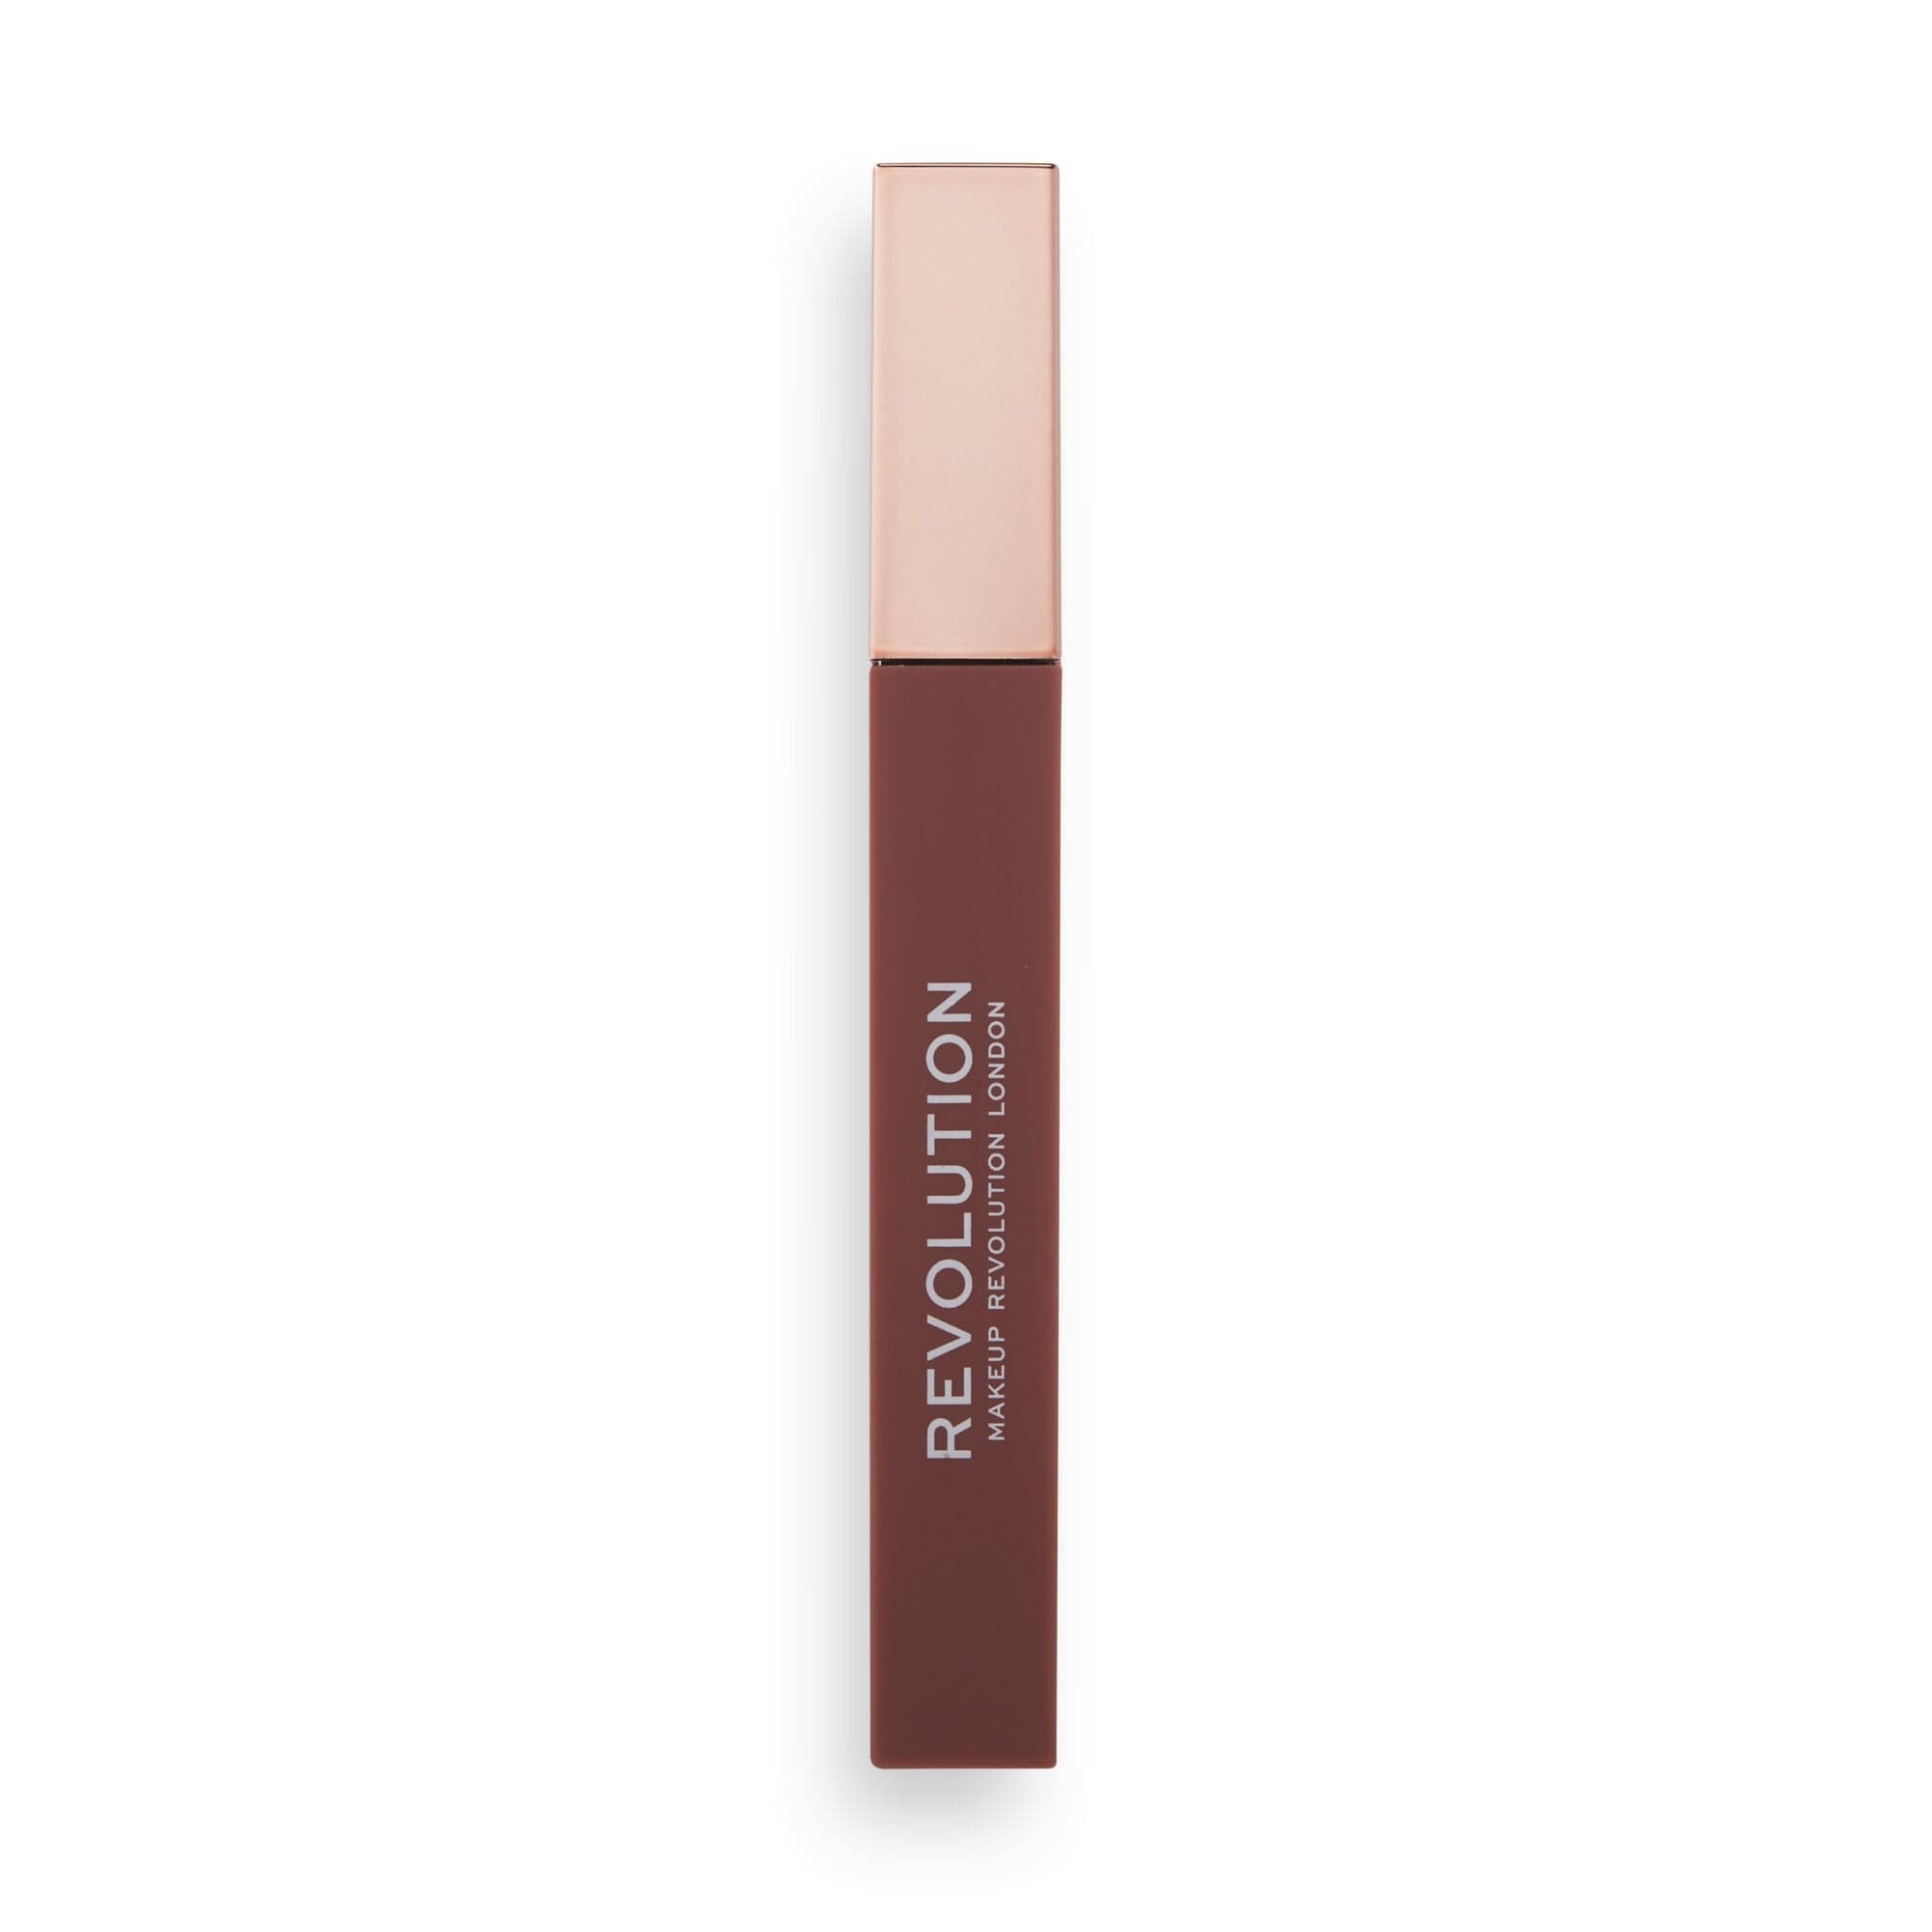 Buy Original Revolution IRL Whipped Lip Crème Frappuccino Nude - Online at Best Price in Pakistan